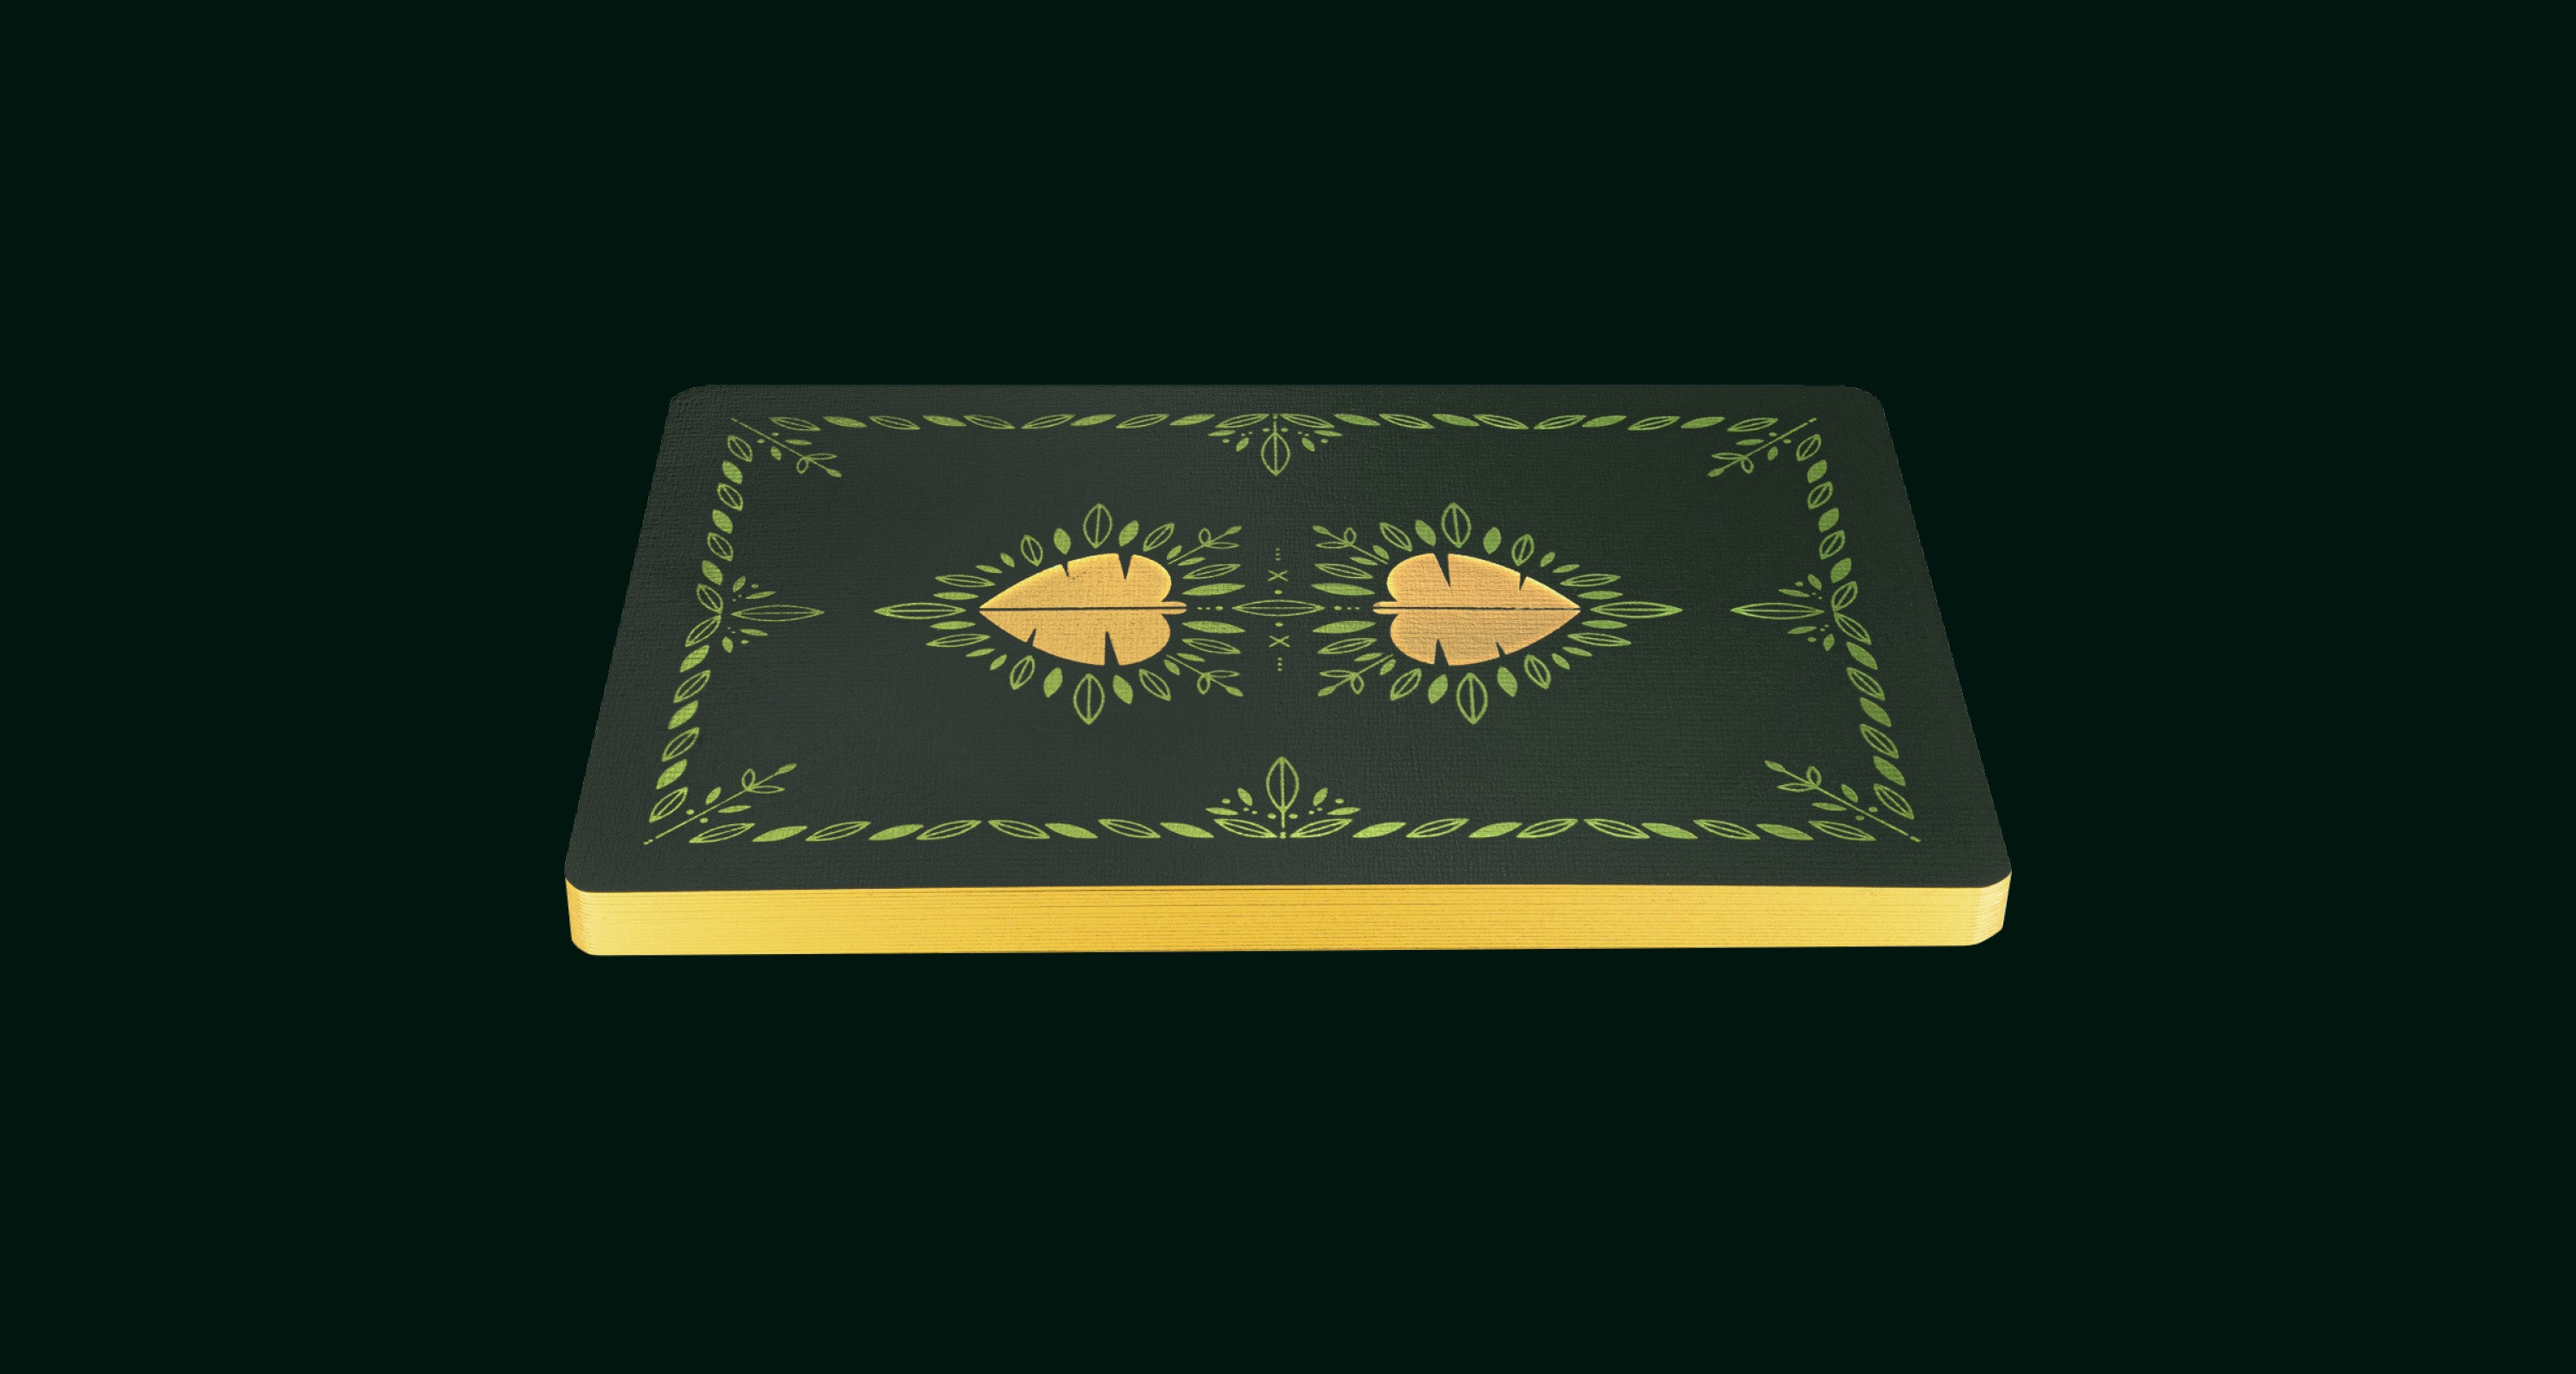 A floating card back on a dark green background